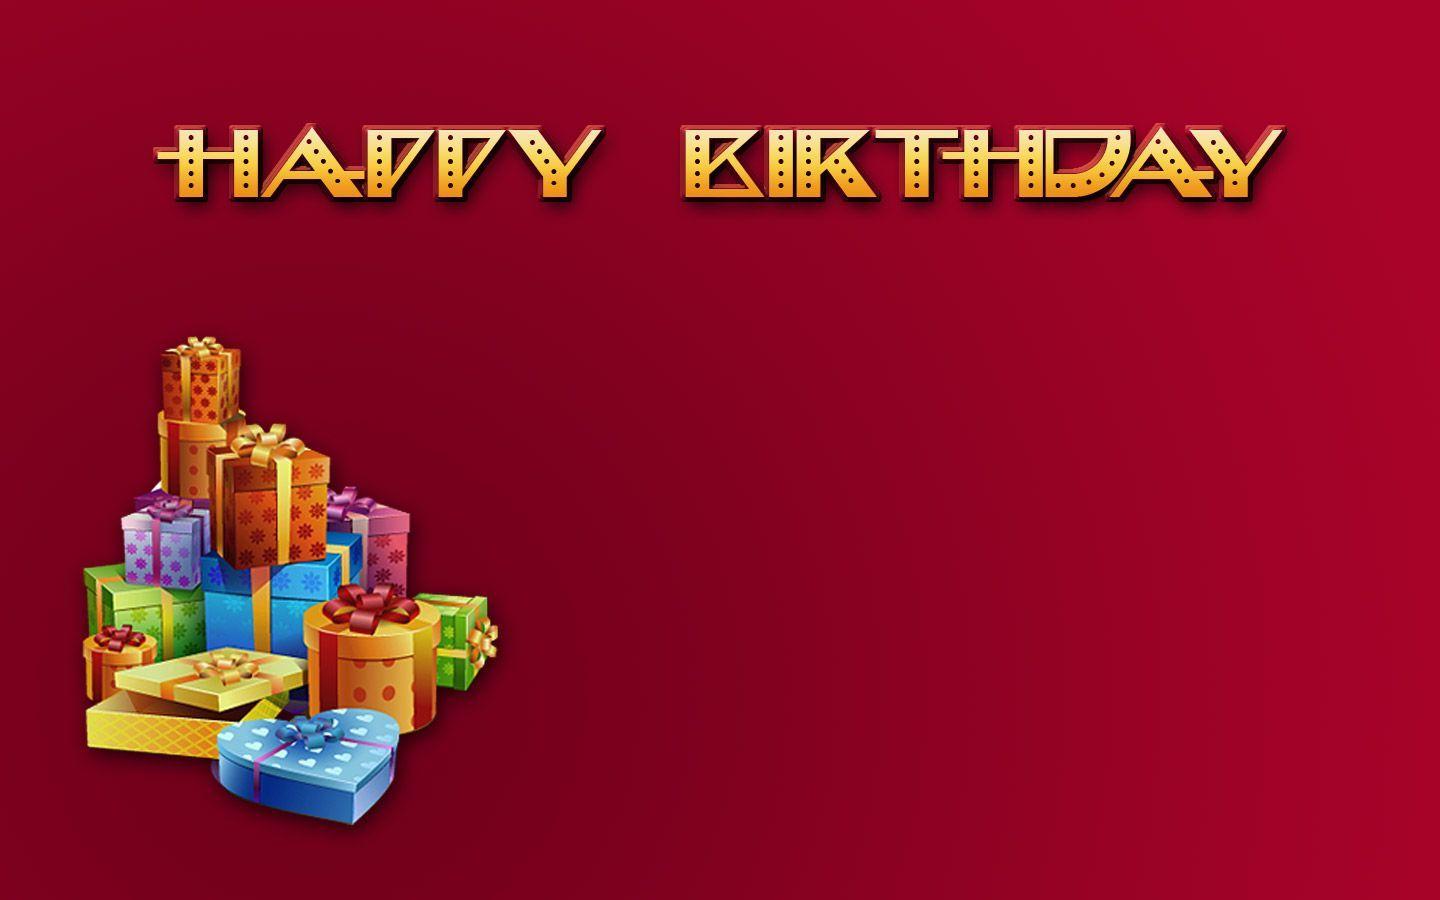 Happy Birthday Wallpaper Image, HD, Free for Facebook. Hey